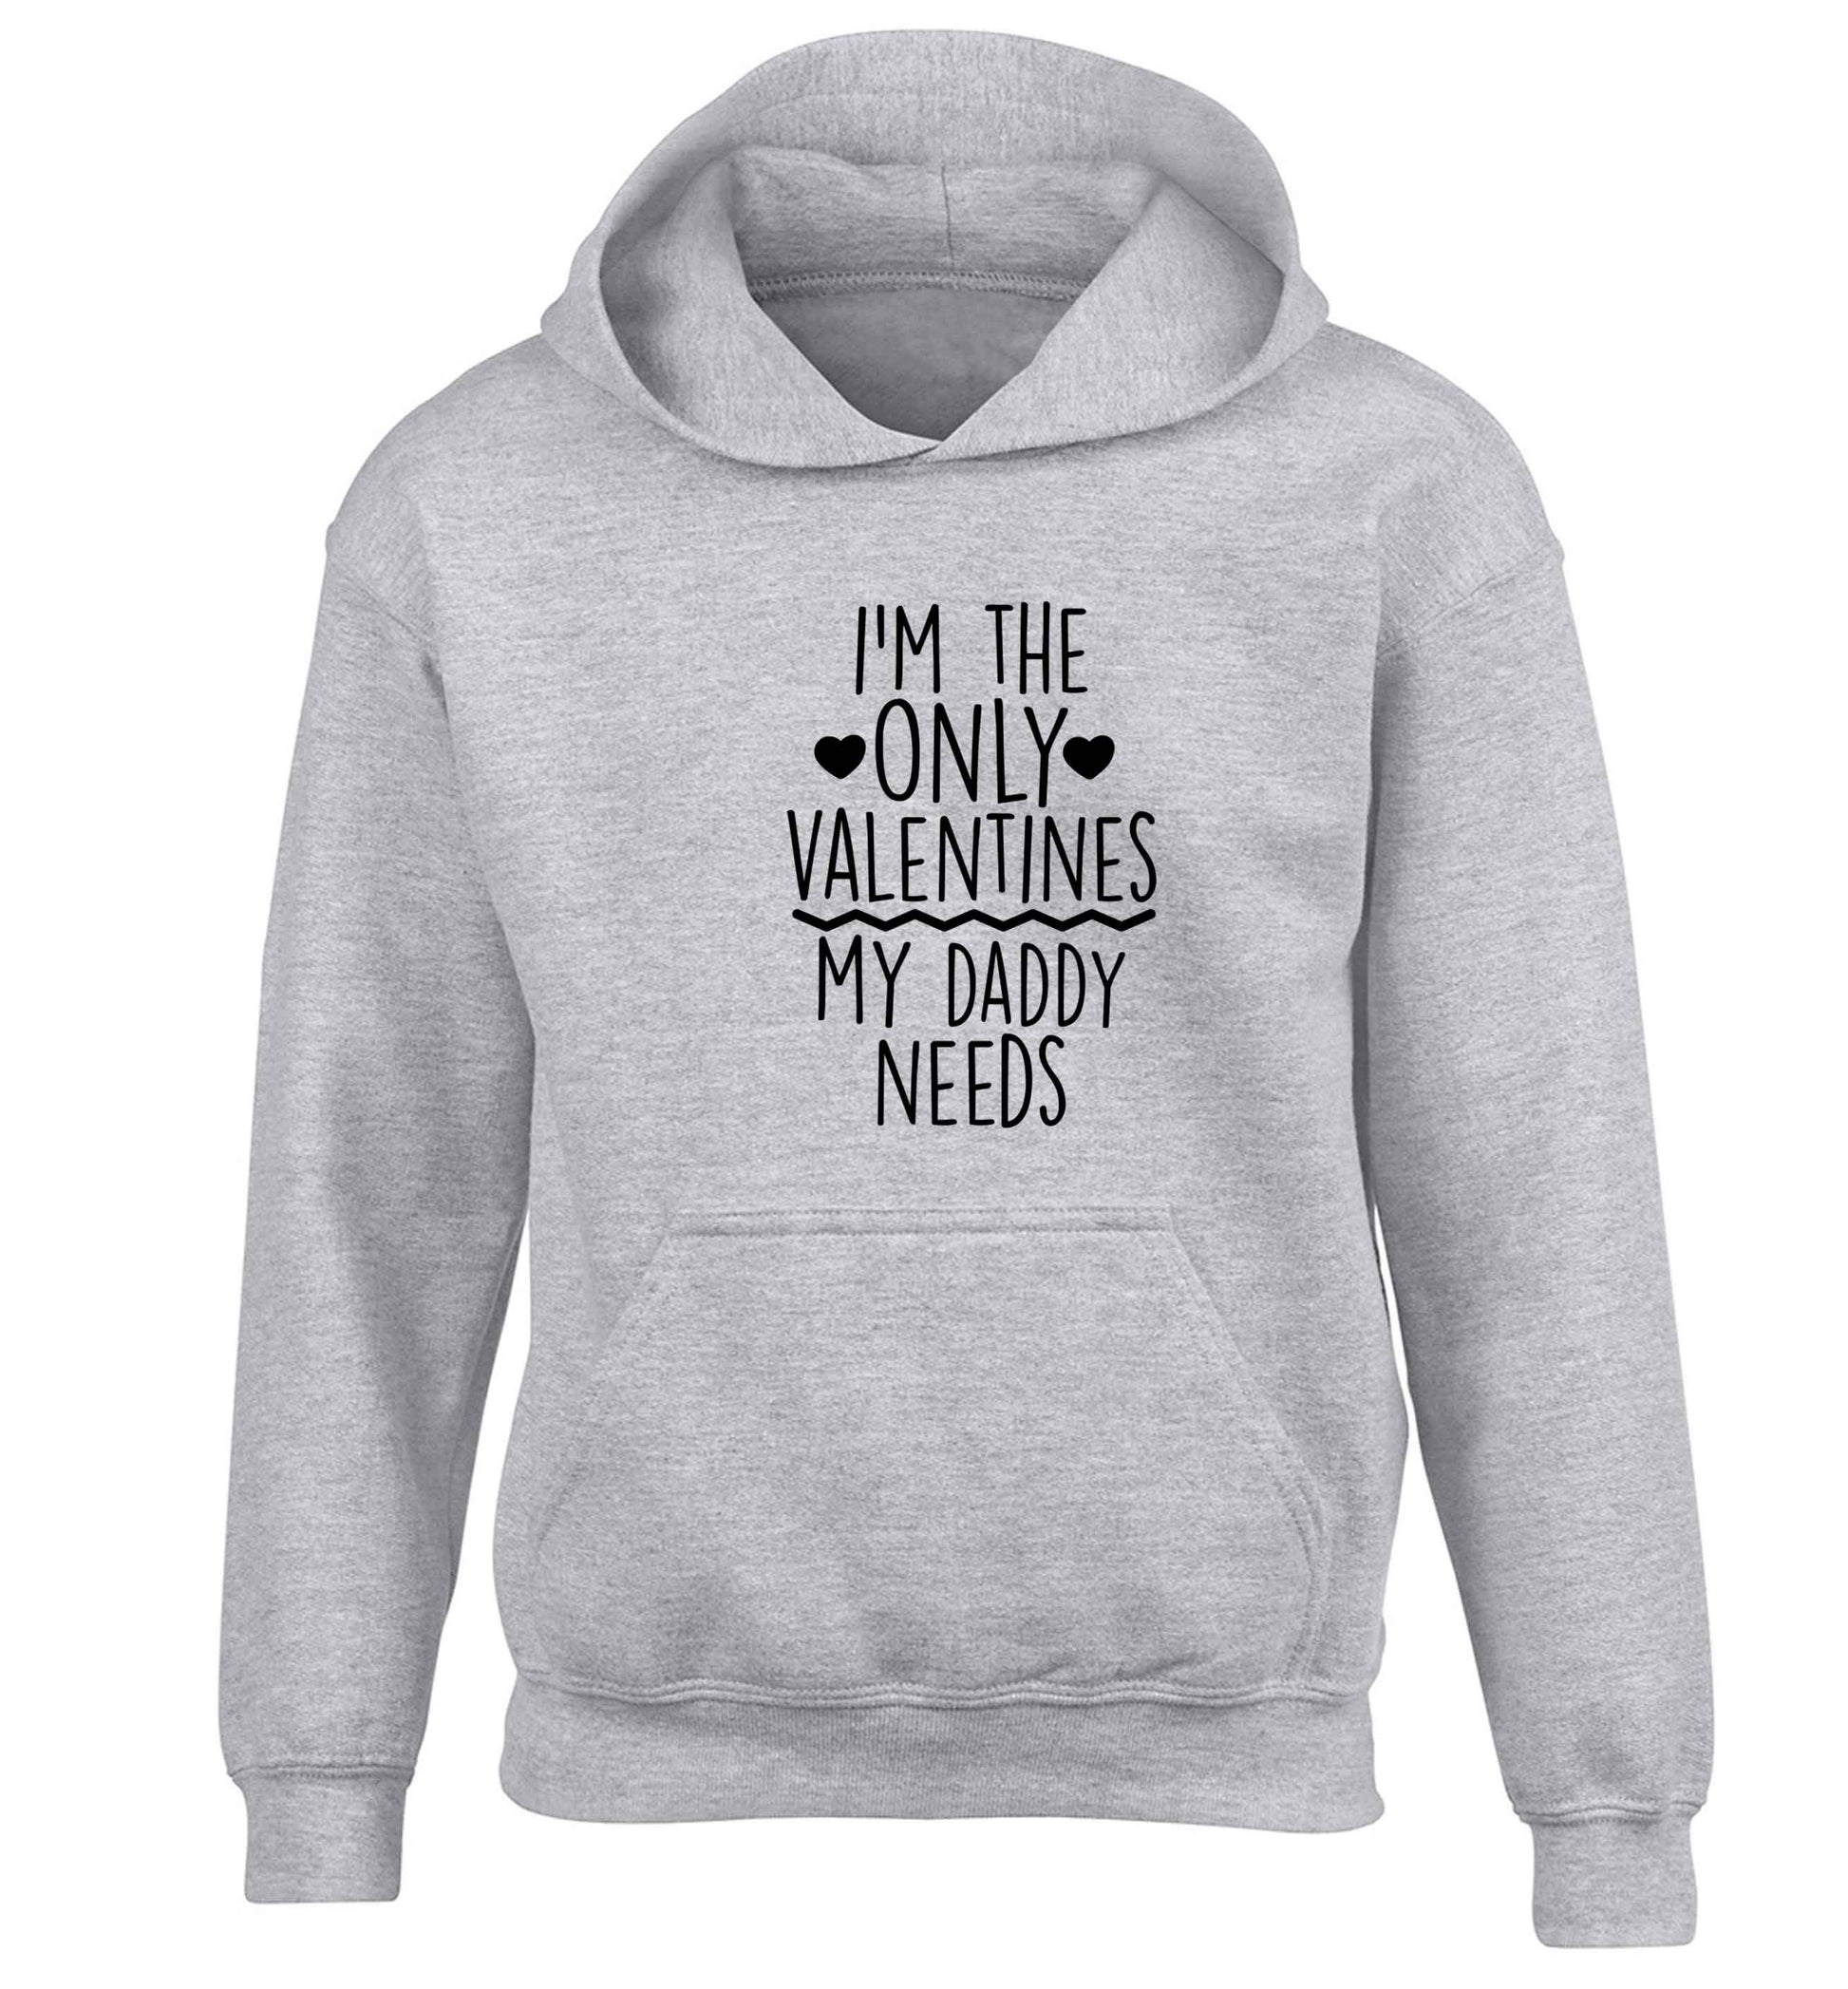 I'm the only valentines my daddy needs children's grey hoodie 12-13 Years